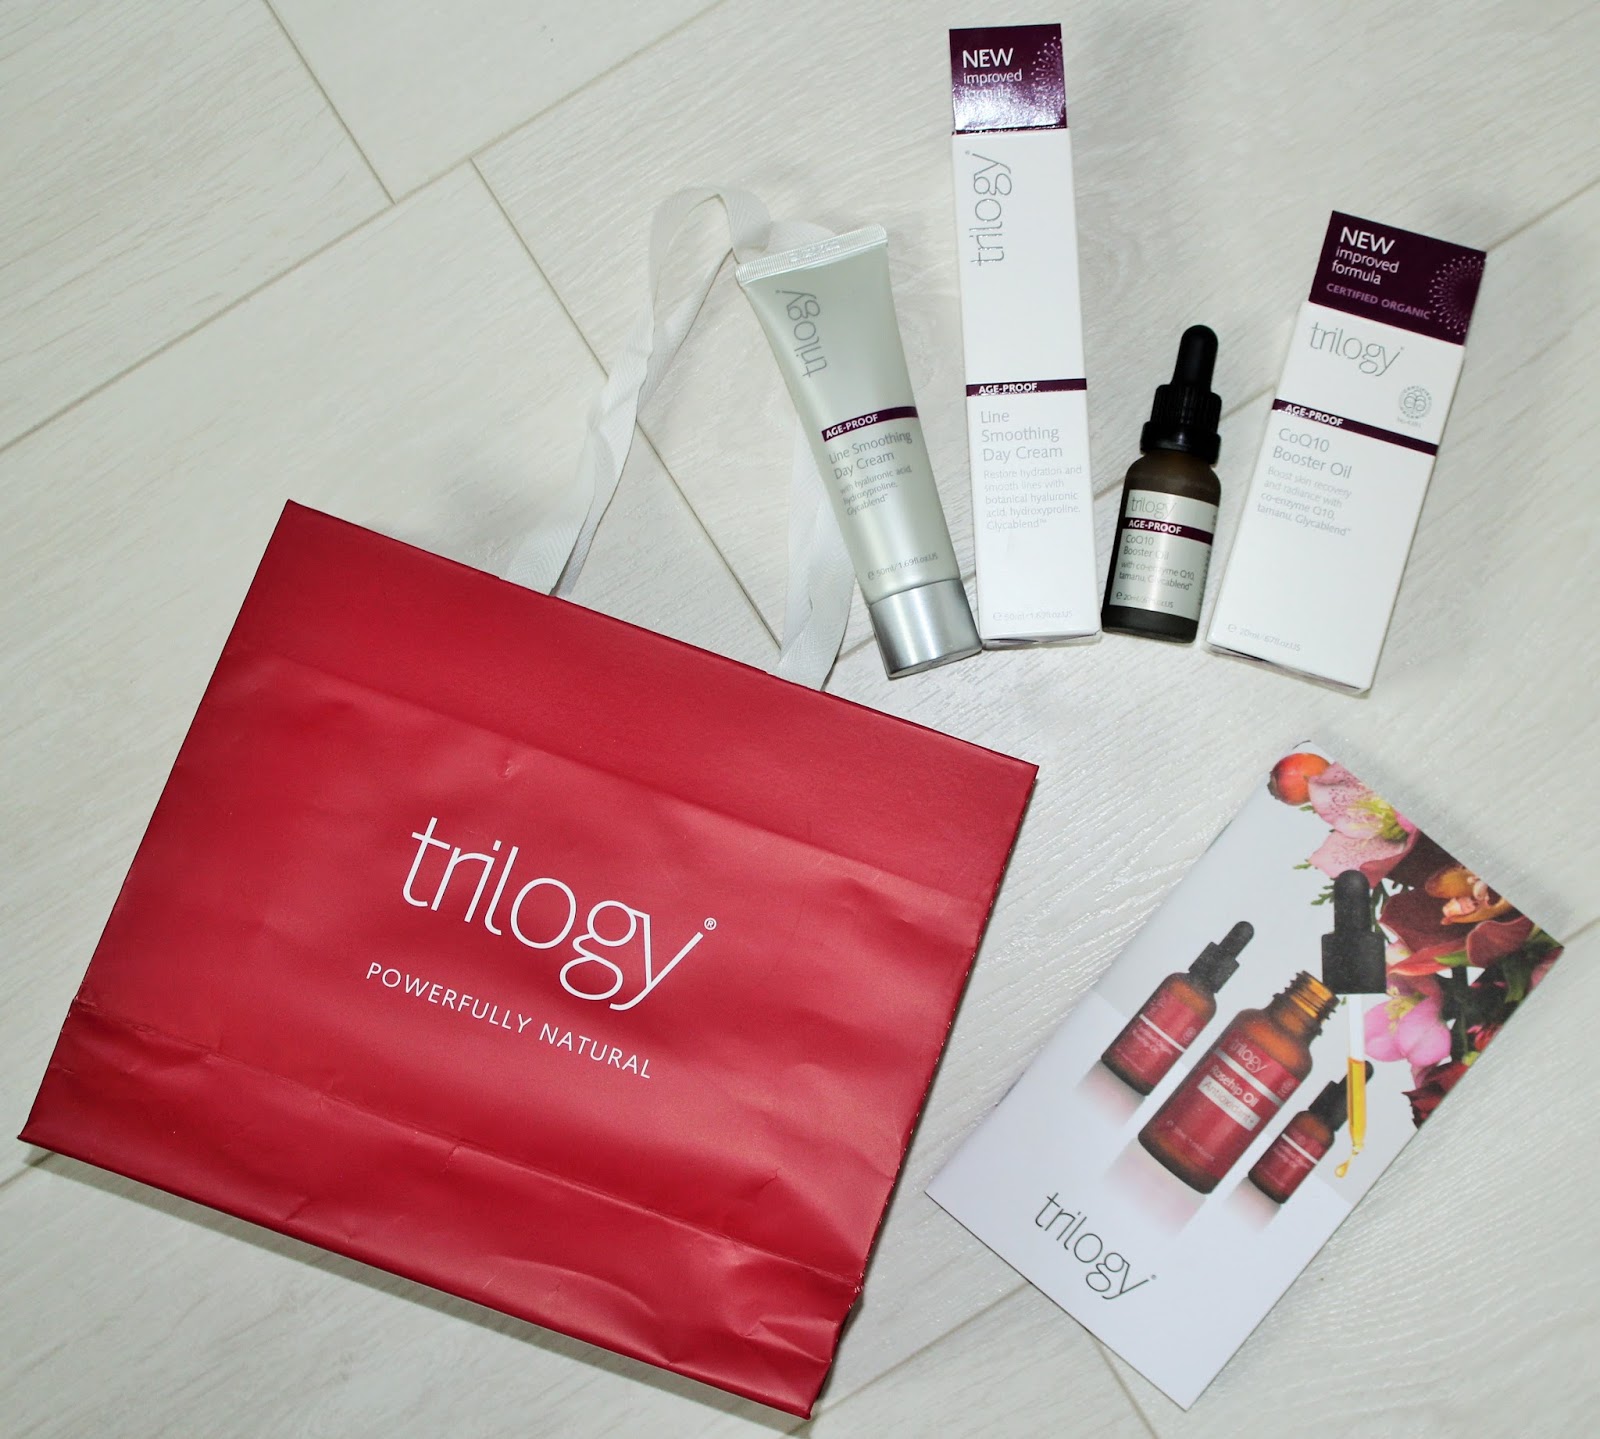 Trilogy Age-Proof Skincare - Introduction and Review